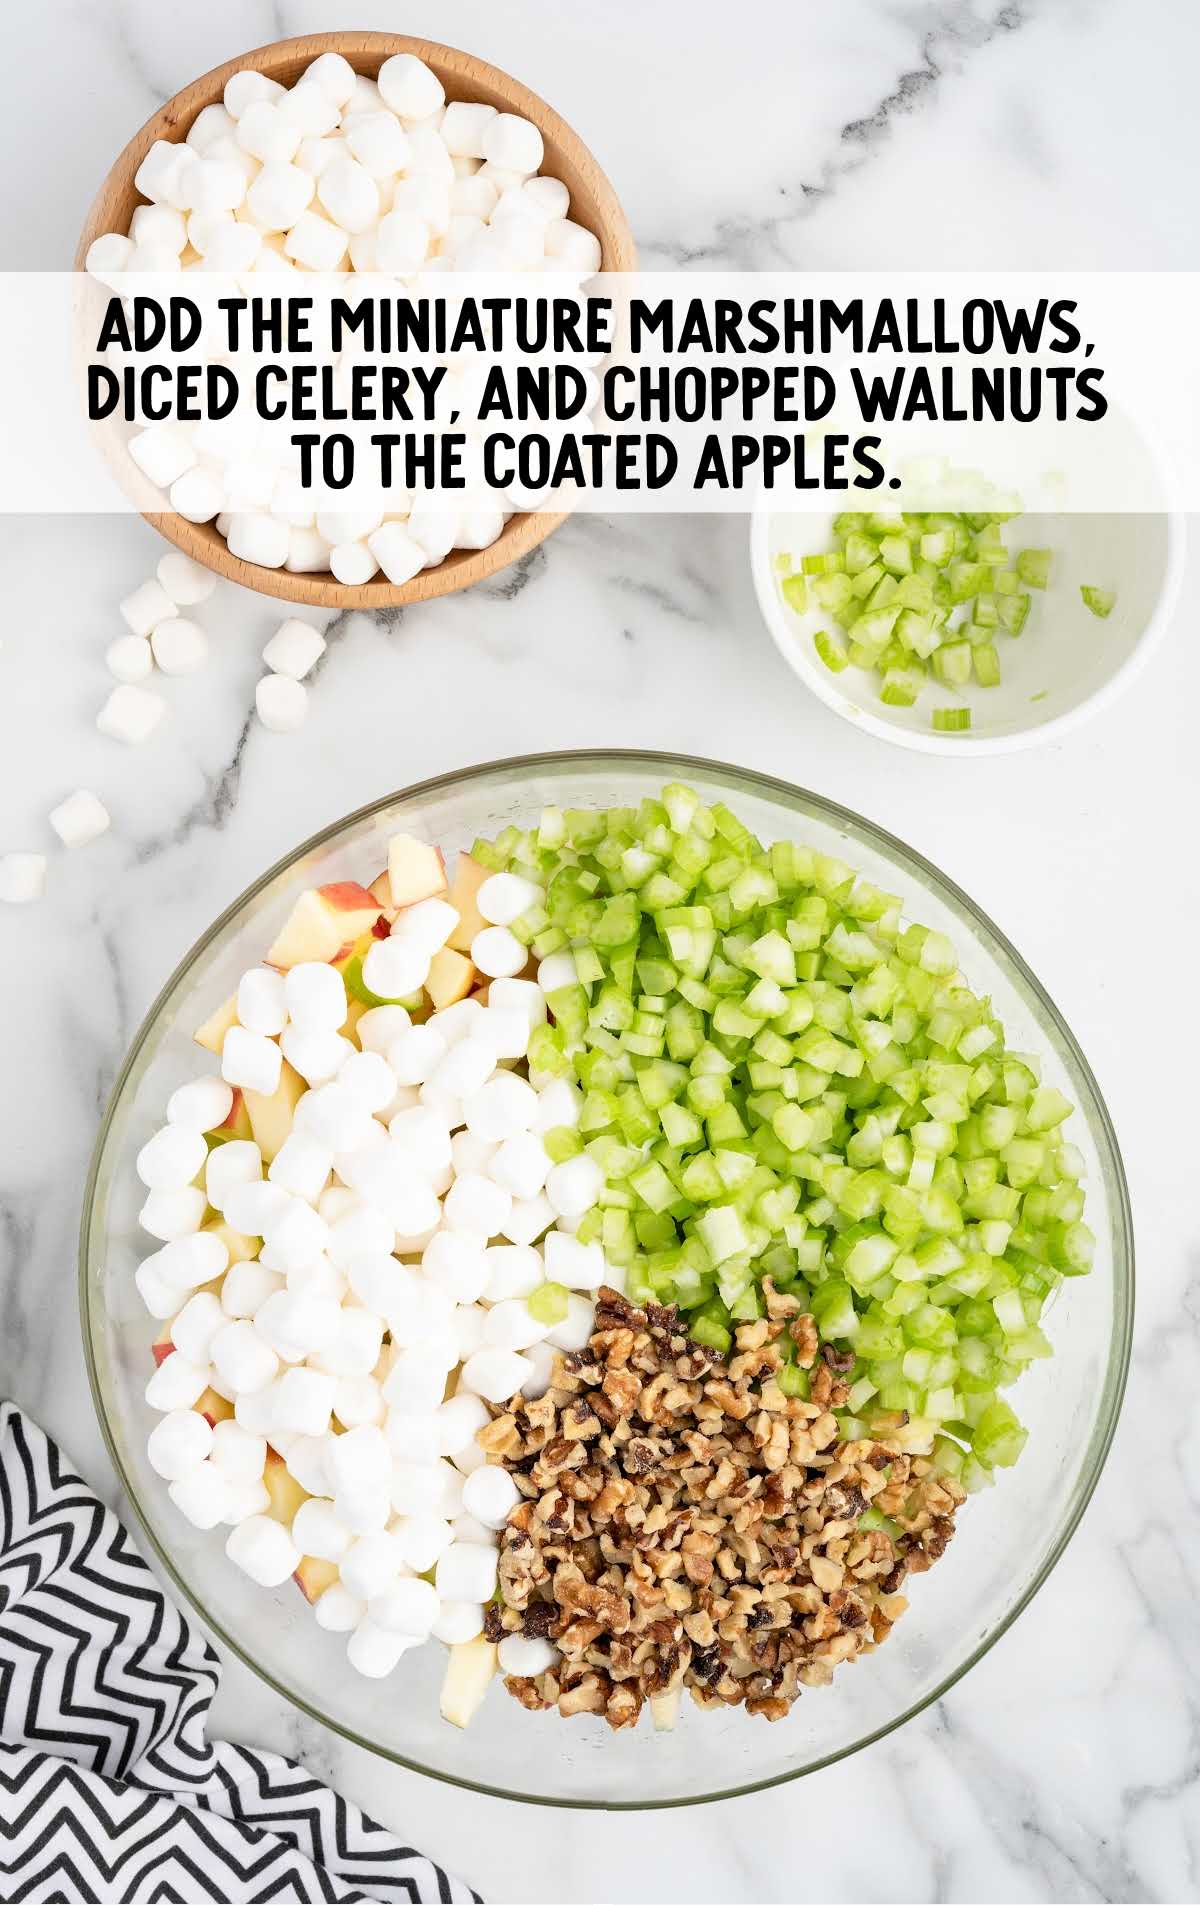 miniature marshmallows, diced celery, and chopped walnuts added to the coated apples in a bowl